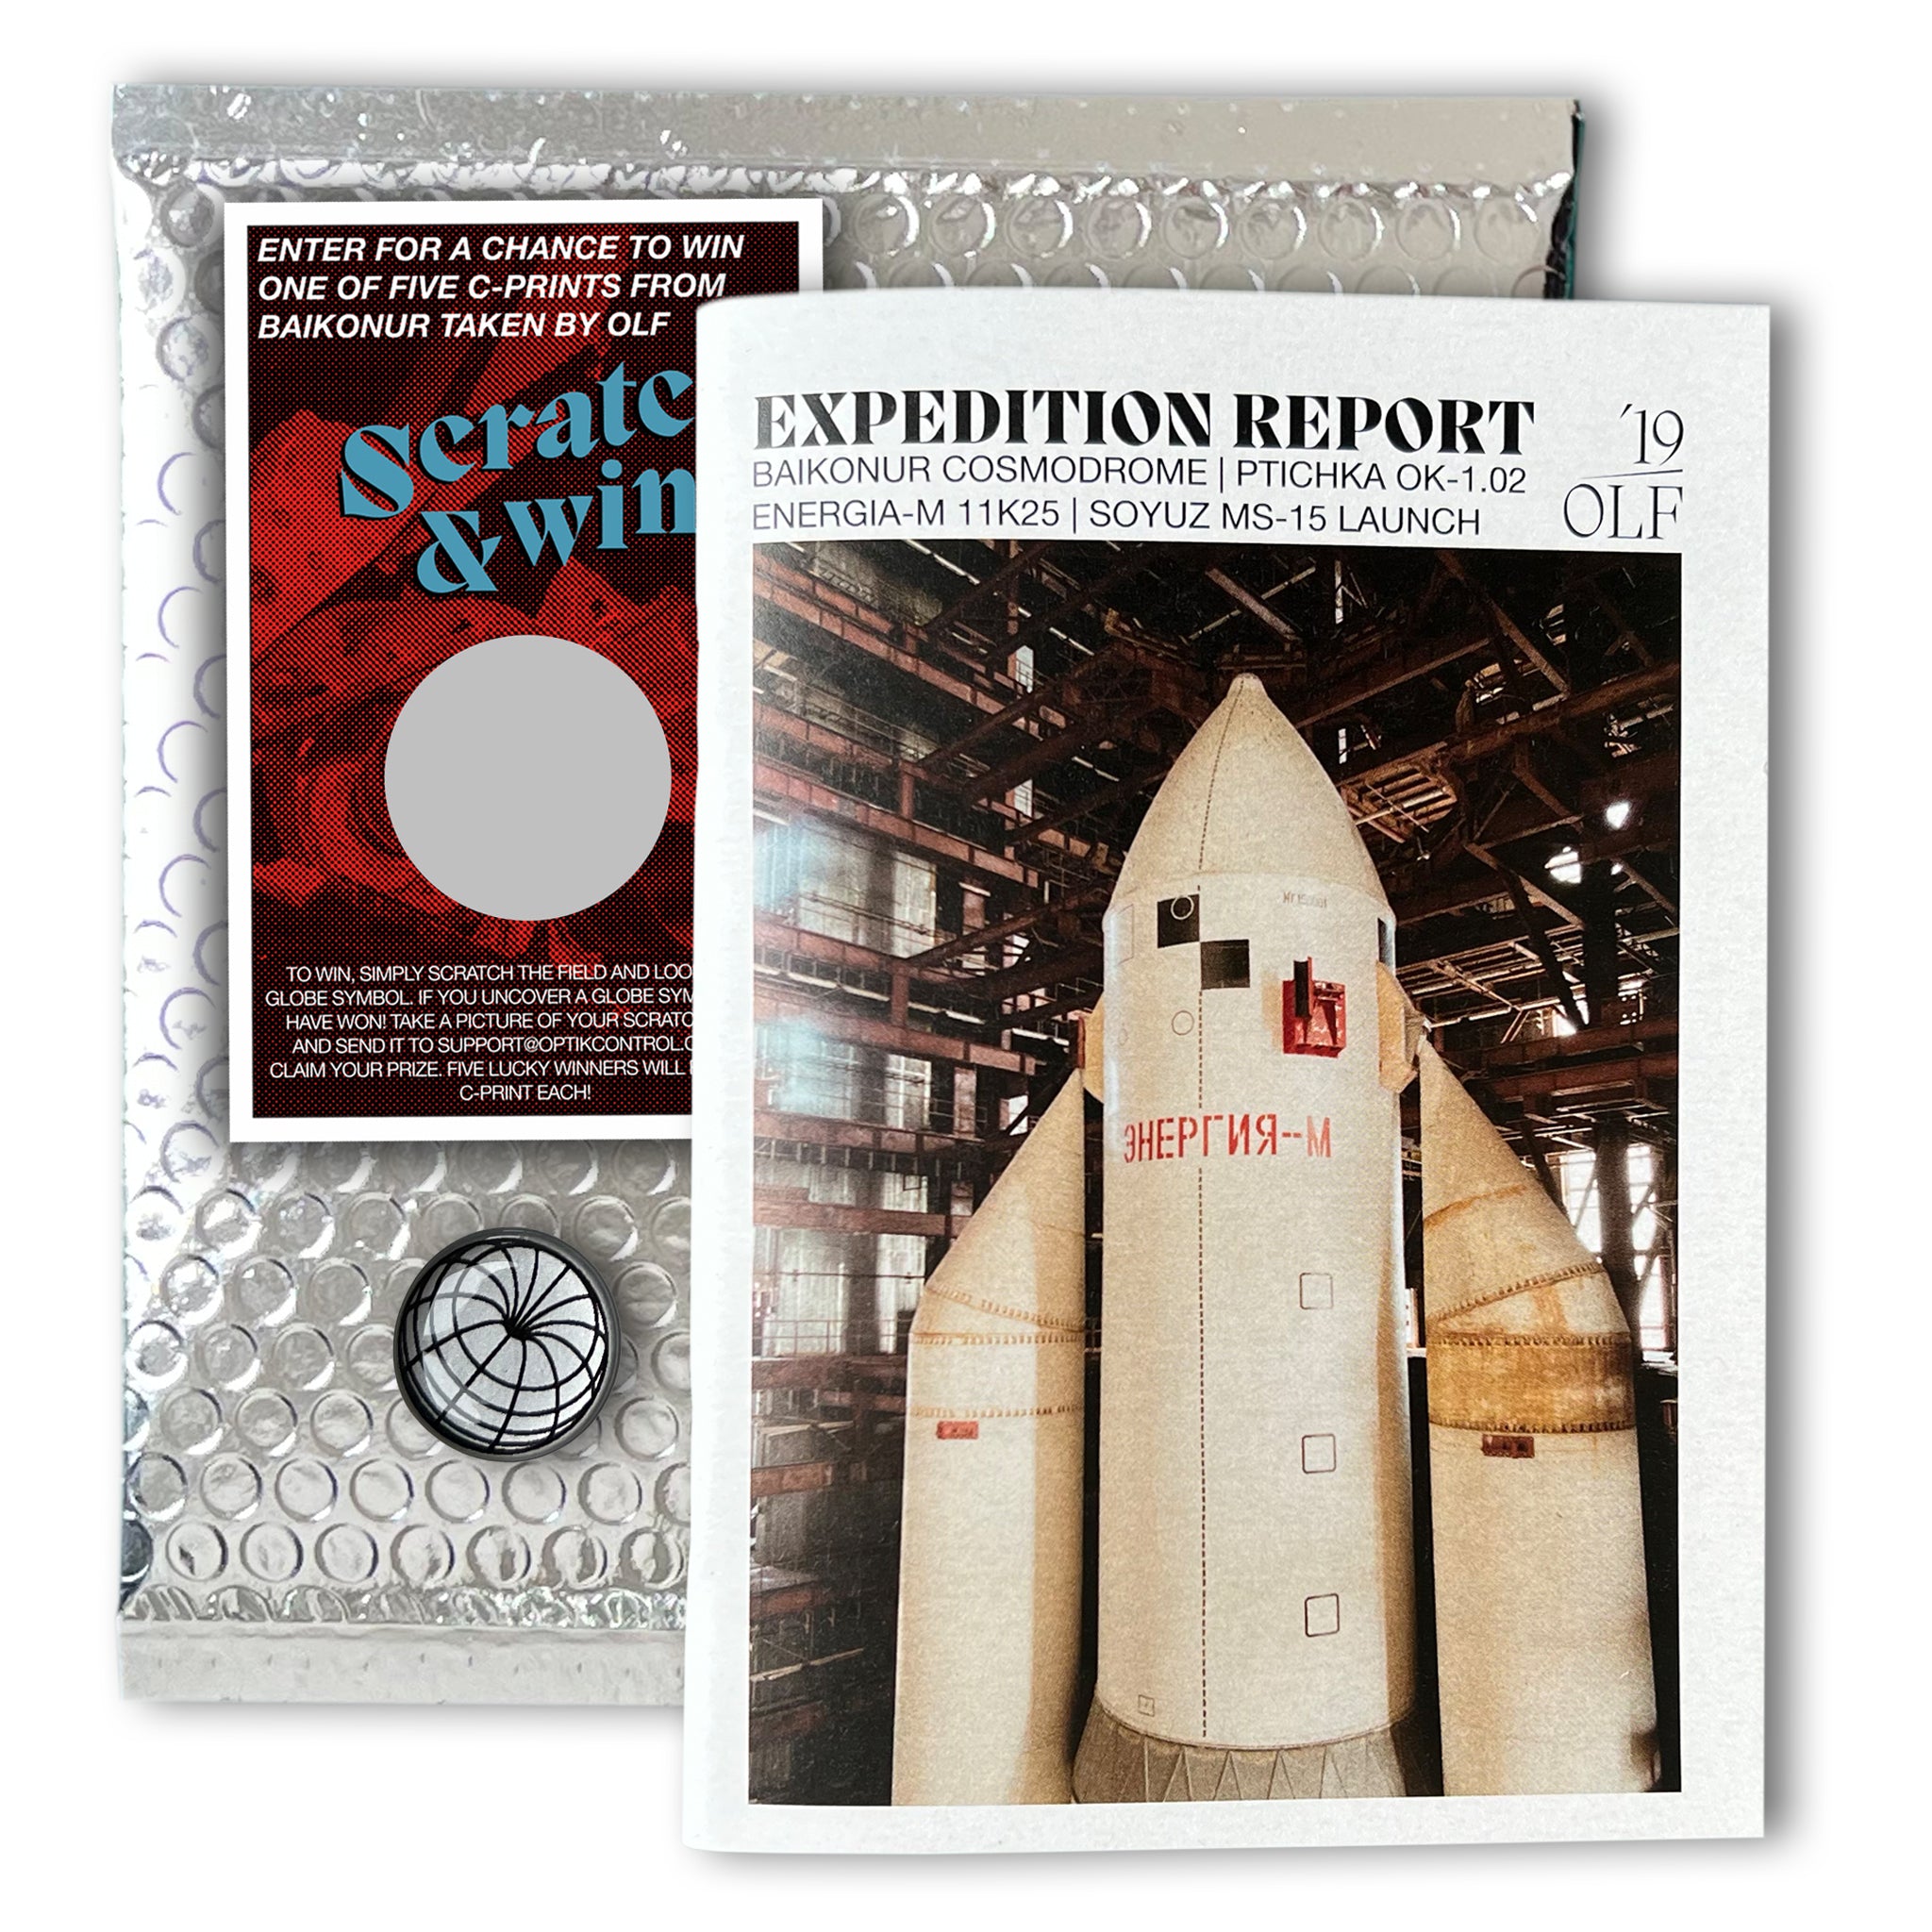 EXPEDITION REPORT BAIKONUR BY OLF